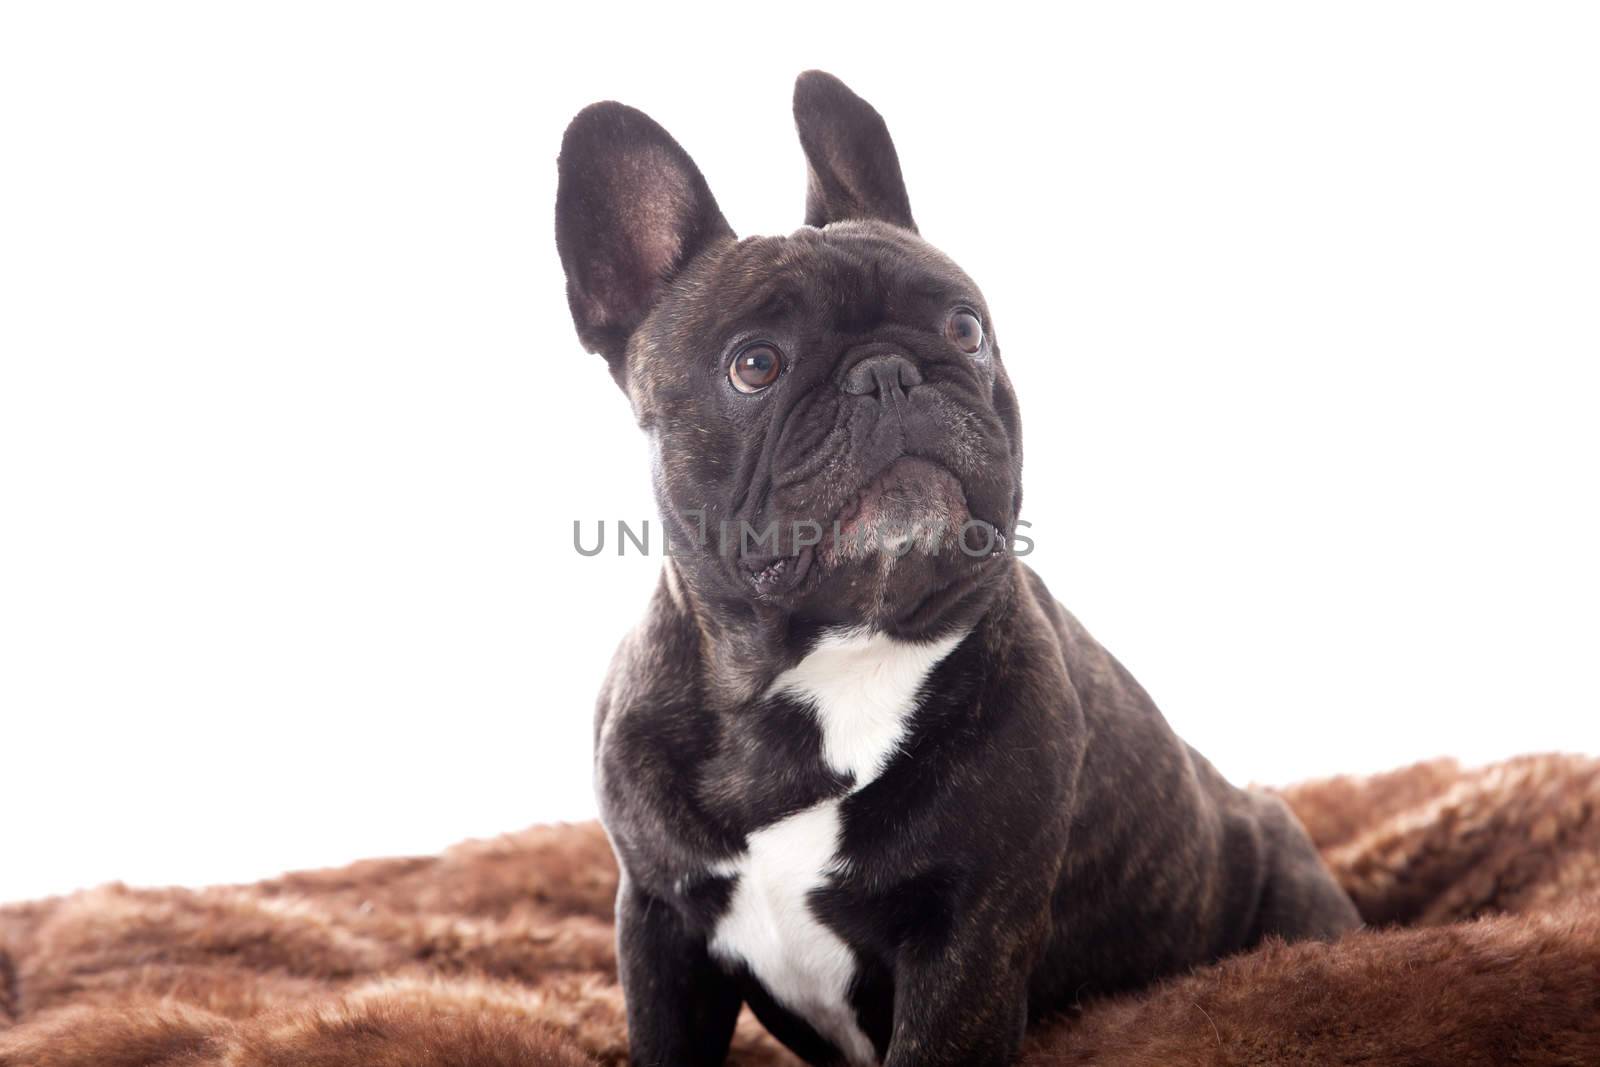 Happy dog photographed in the studio on a white background